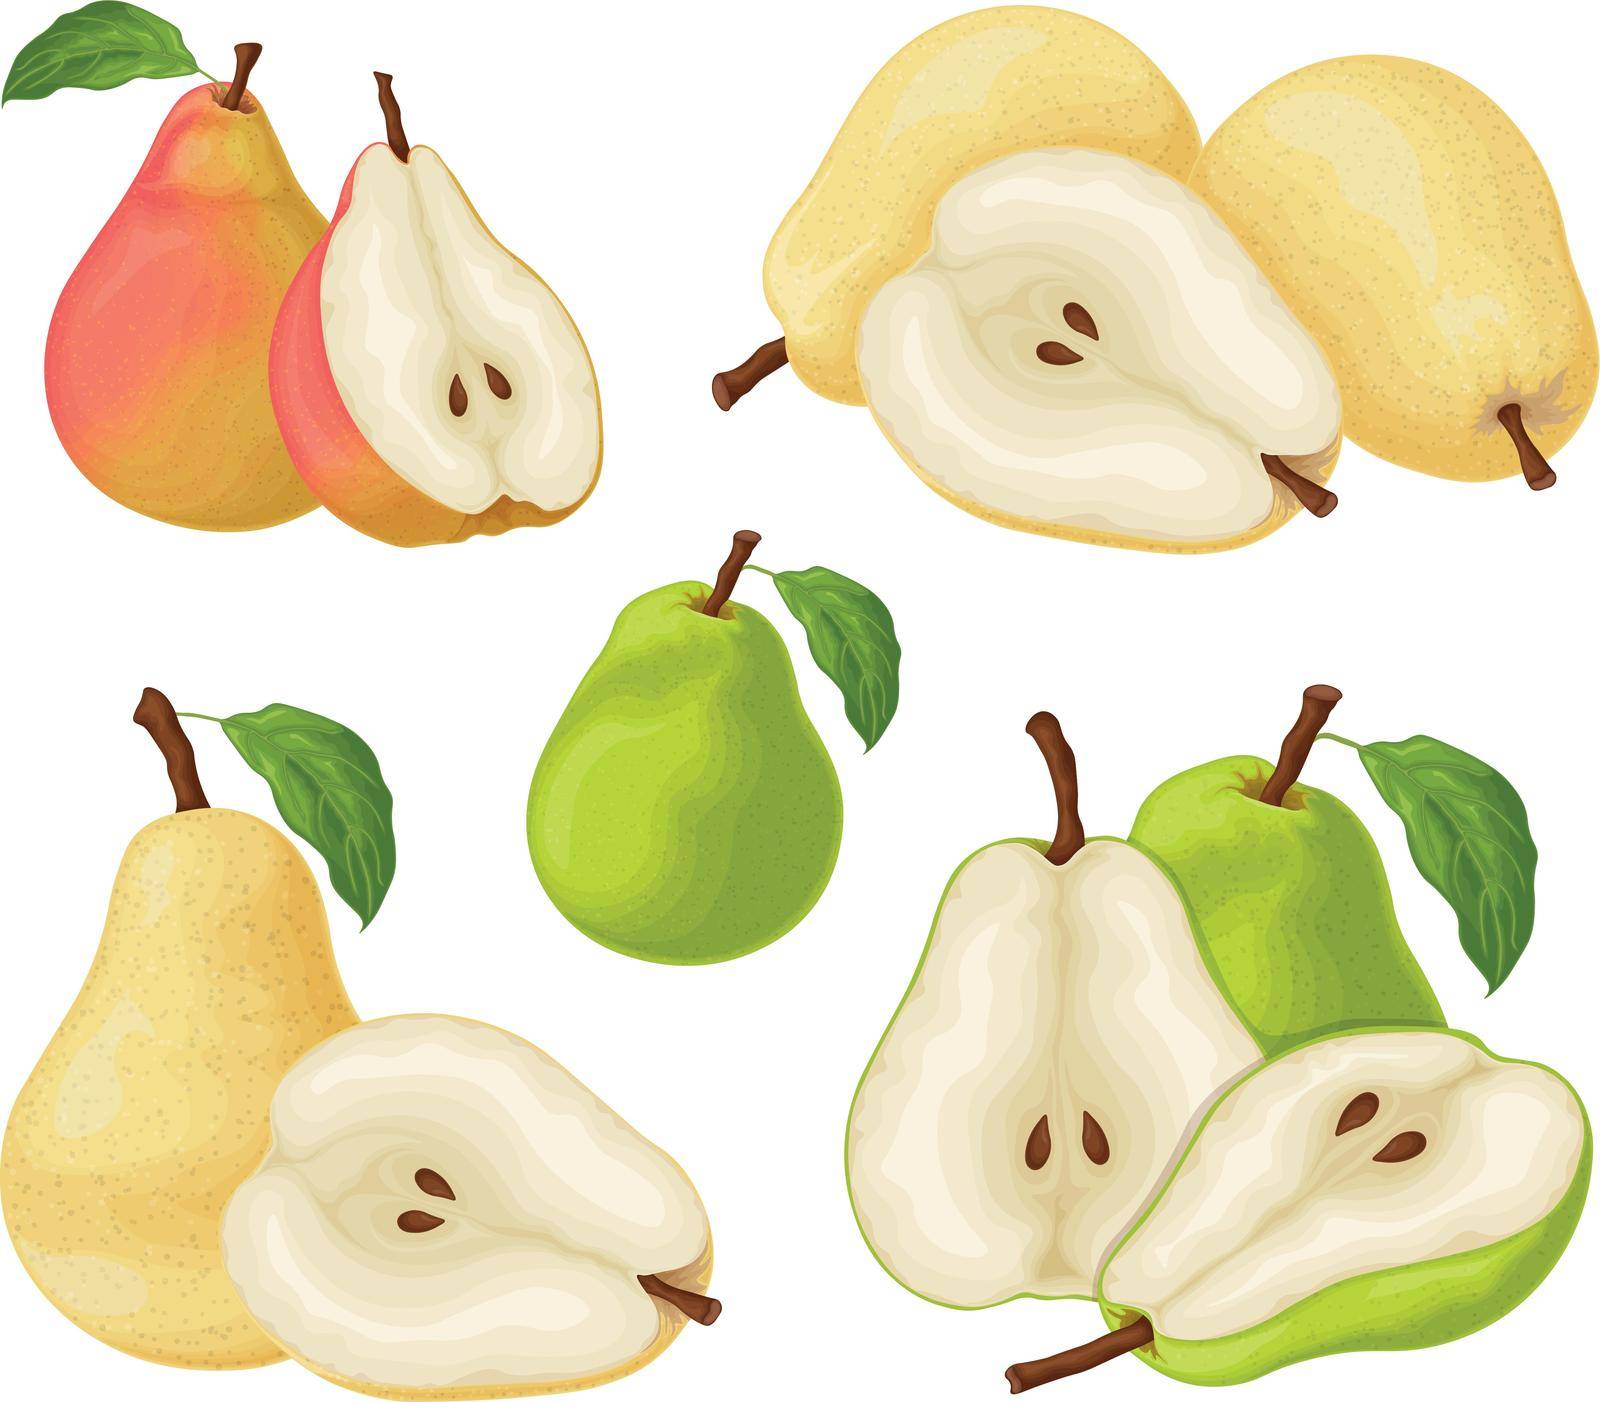 Pears. Set with pears. Chopped and whole pears. Ripe fruit from the tree. Vegetarian products. Organic food. Vector illustration isolated on a white background.